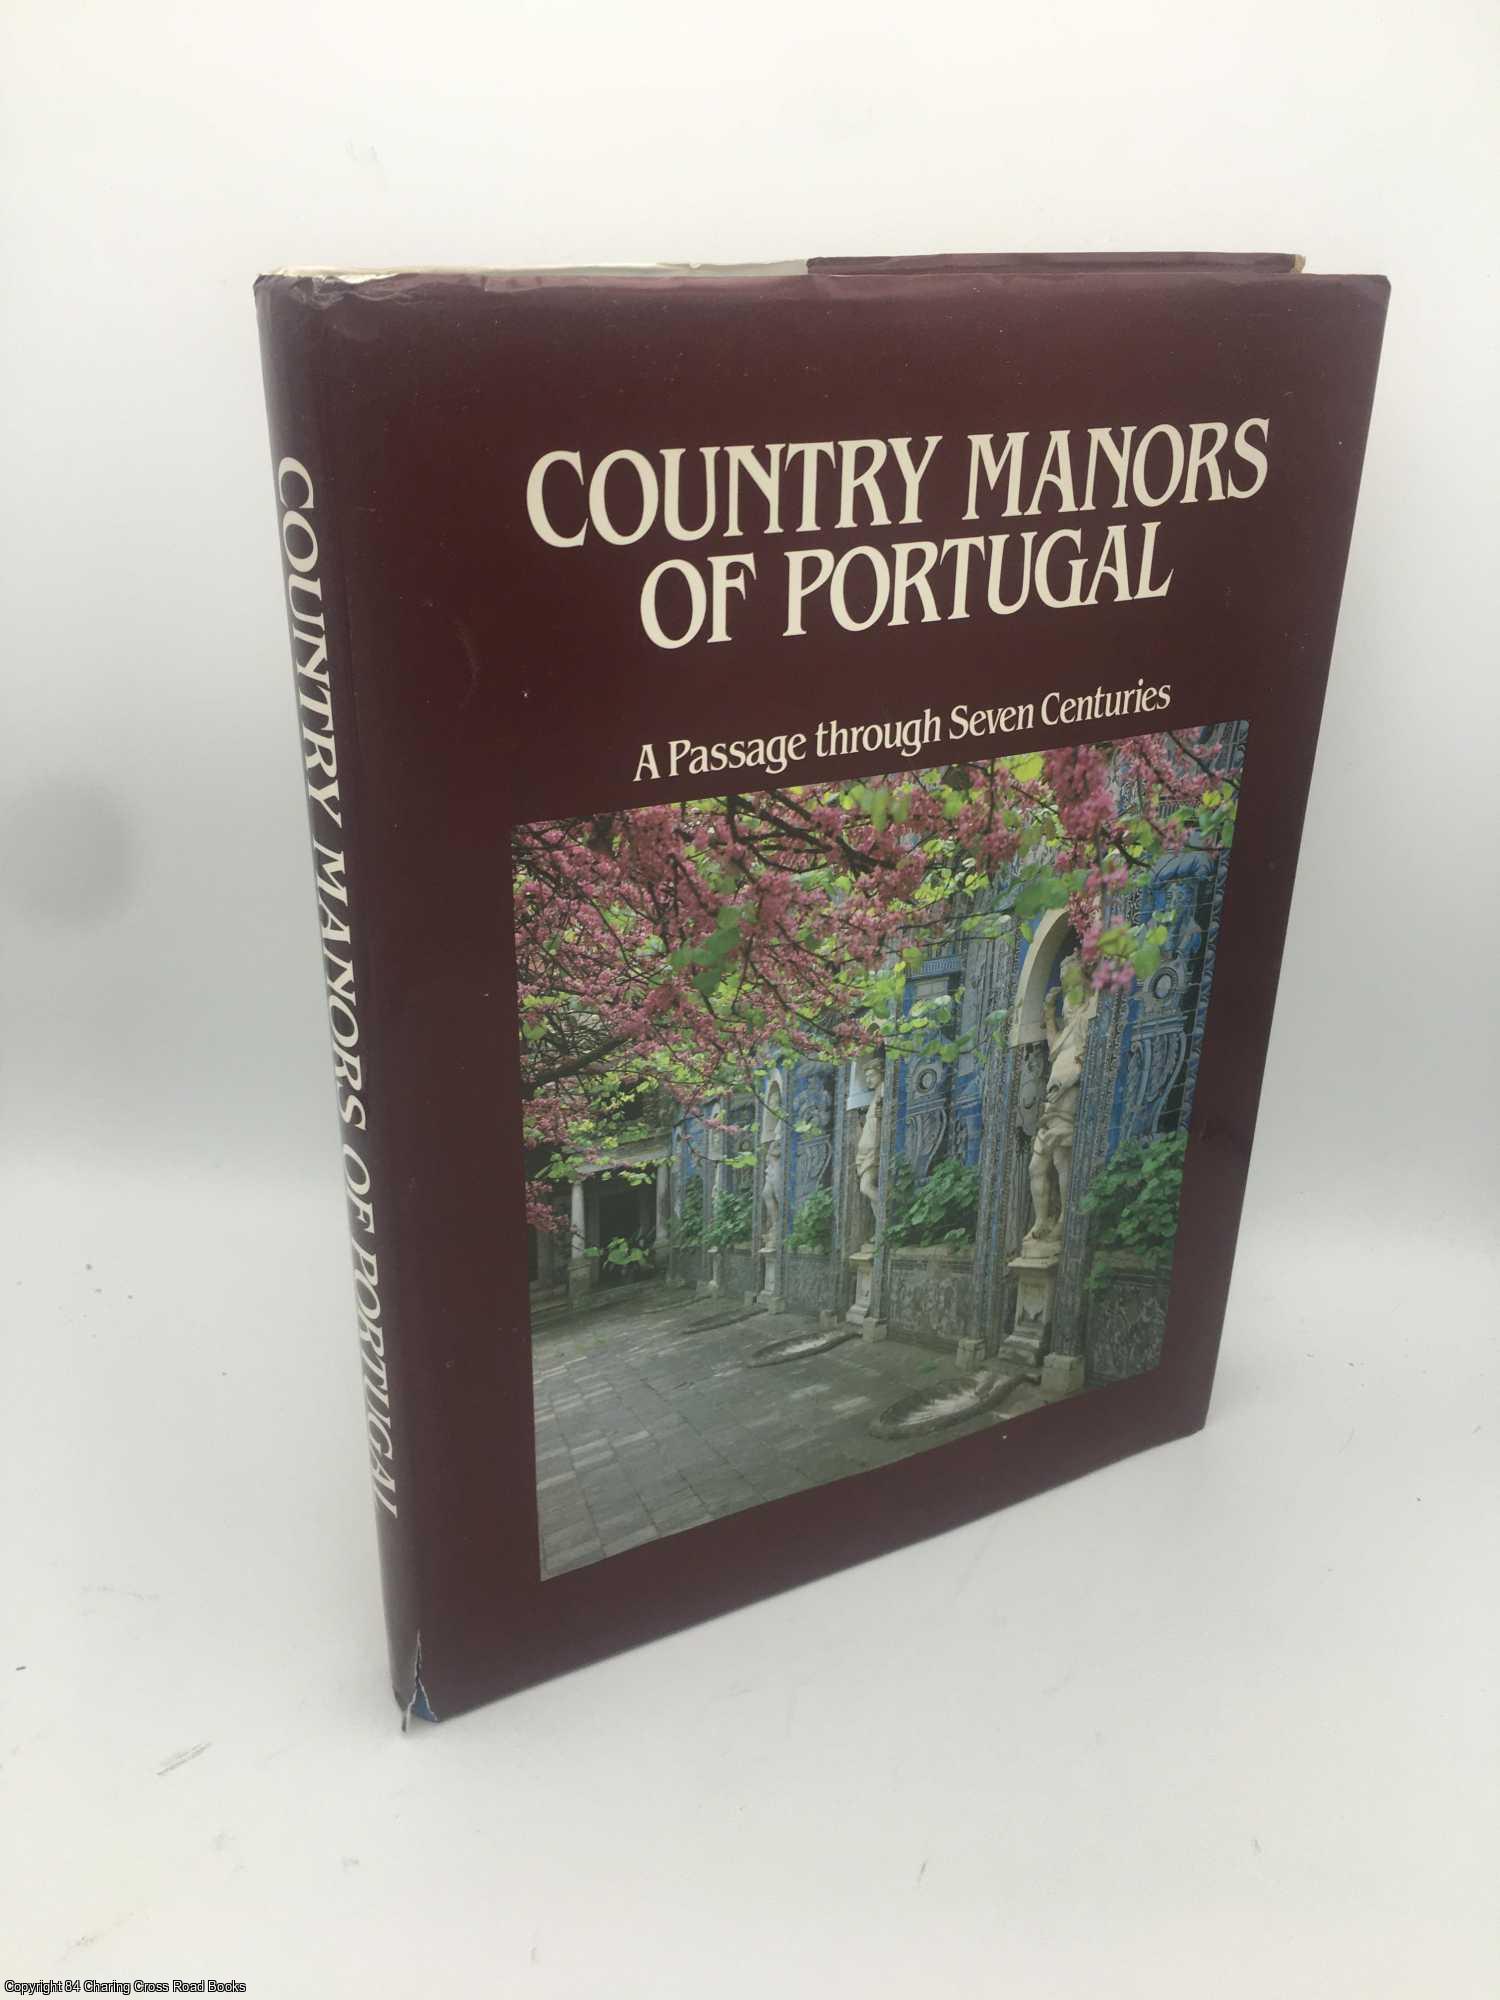 Binney, Marcus - Country Manors of Portugal: A Passage Through Seven Centuries